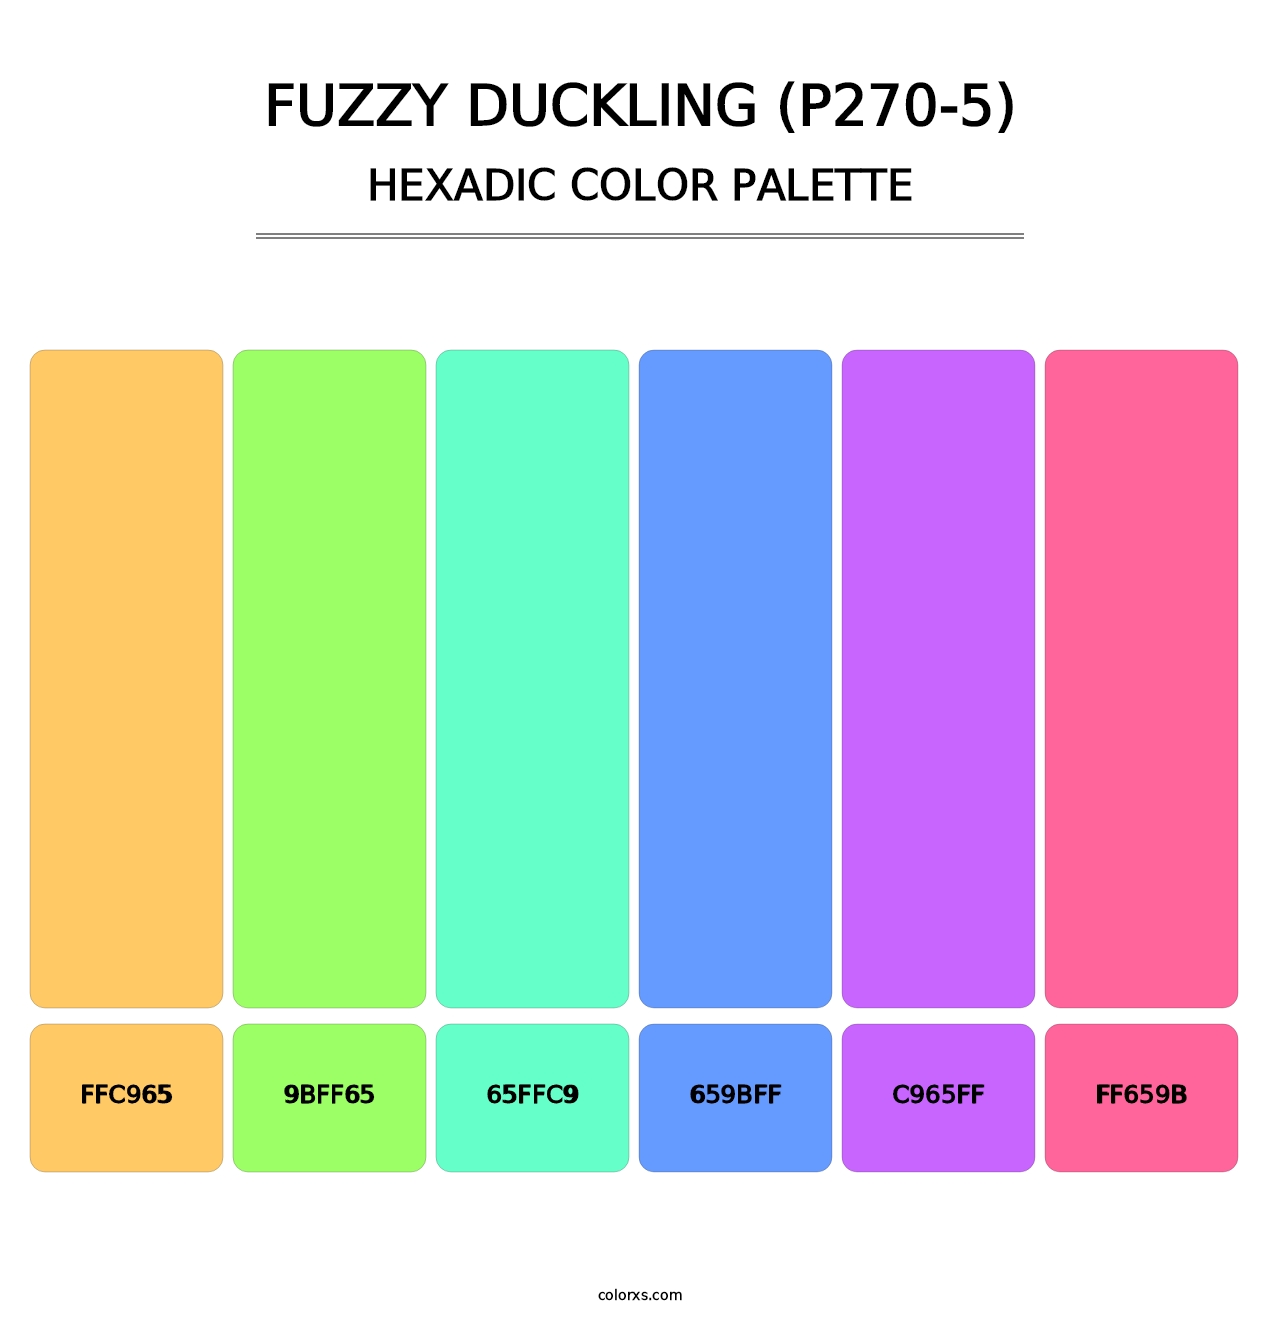 Fuzzy Duckling (P270-5) - Hexadic Color Palette